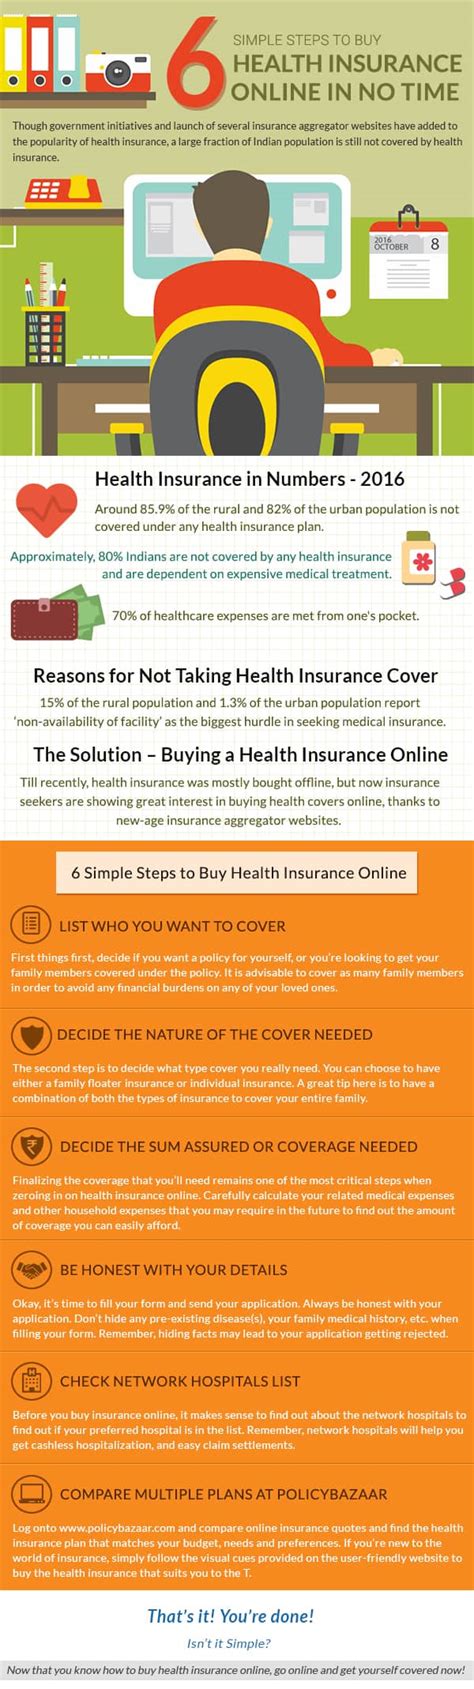 Health insurance plans for individuals and family. Health Insurance Plans | Medical Insurance Plans